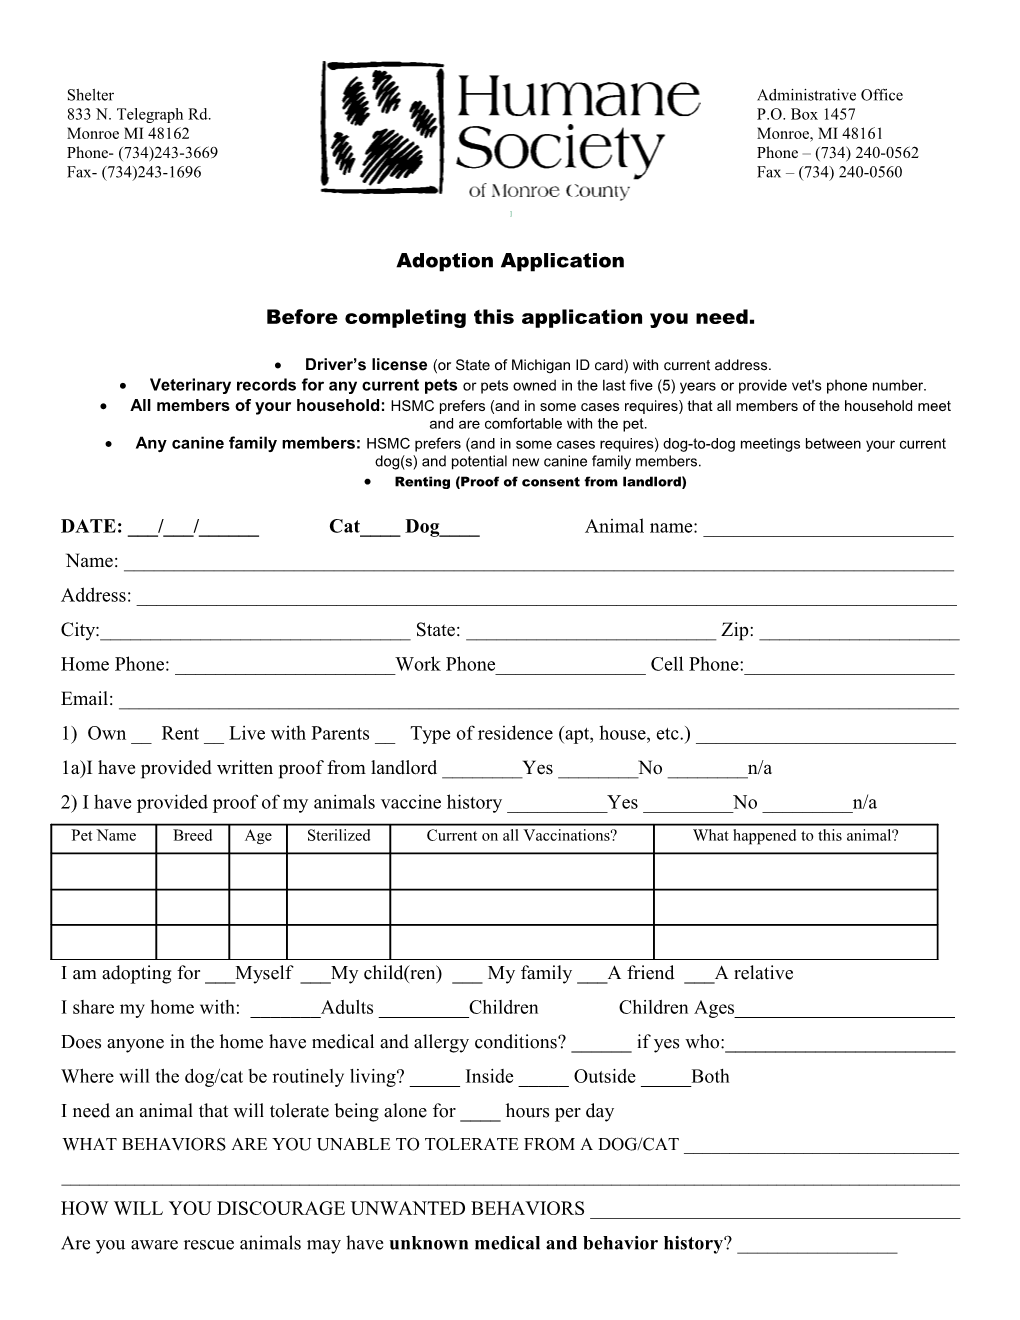 Before Completing This Application You Need